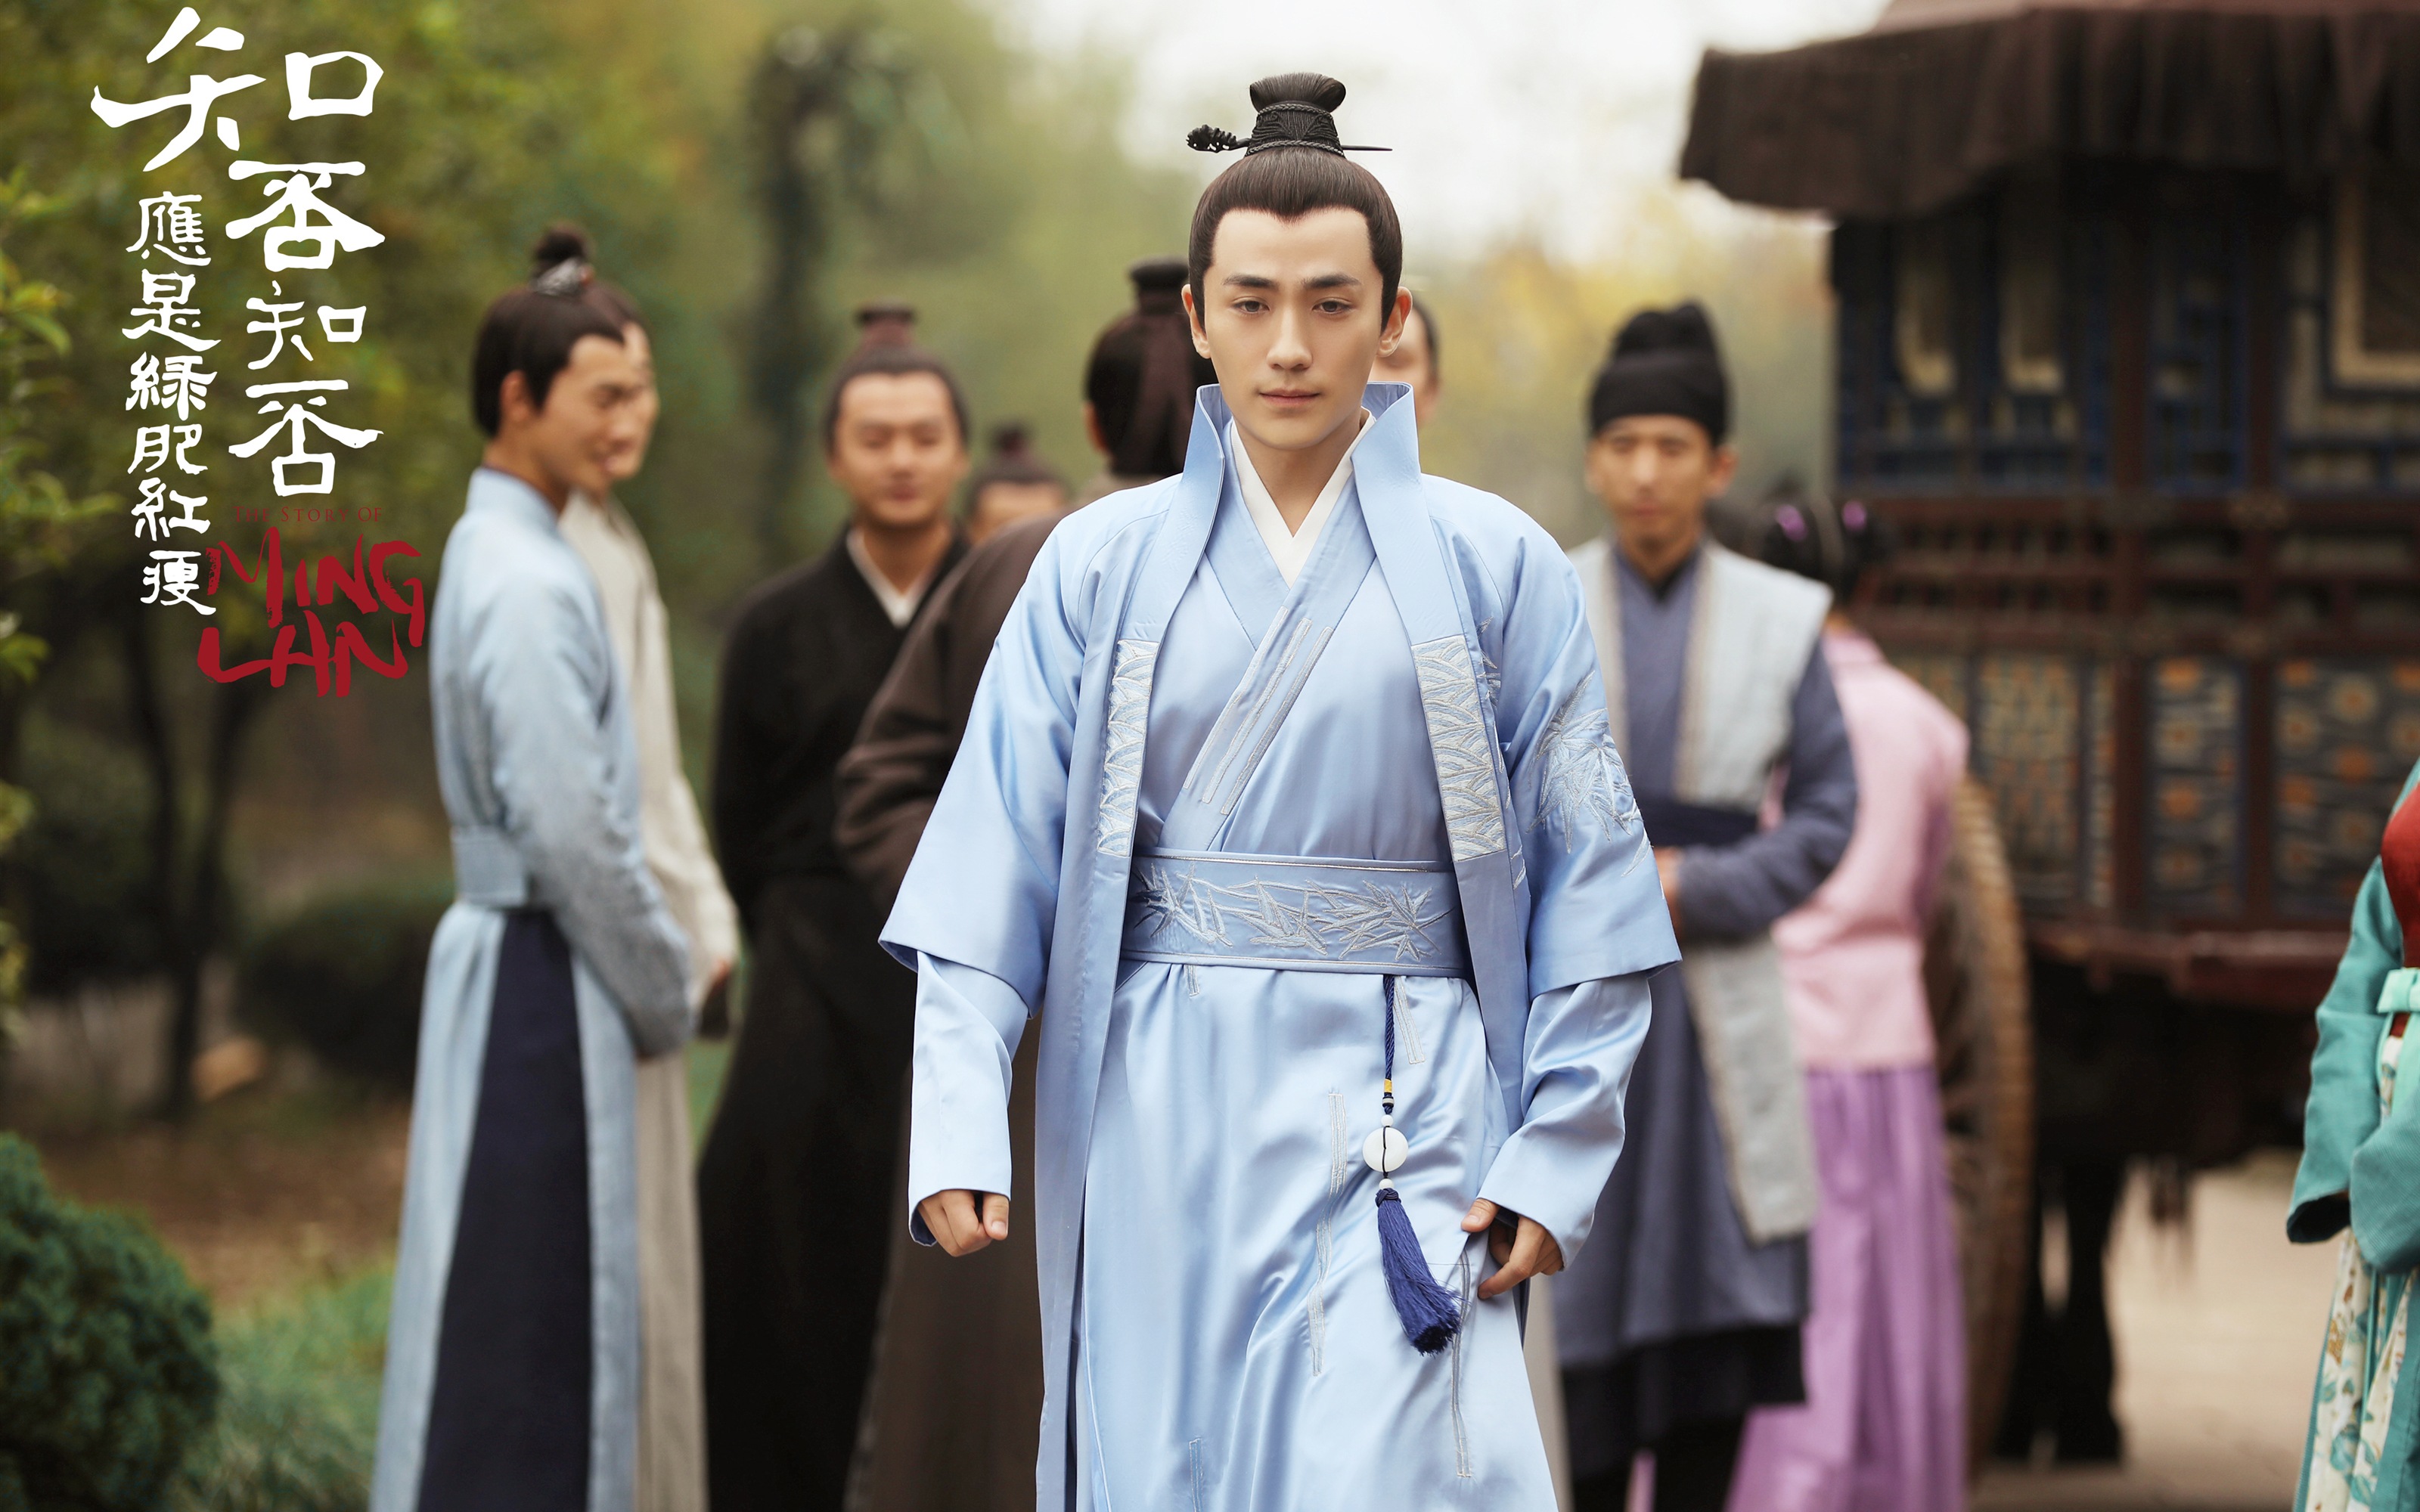 The Story Of MingLan, TV series HD wallpapers #54 - 3200x2000